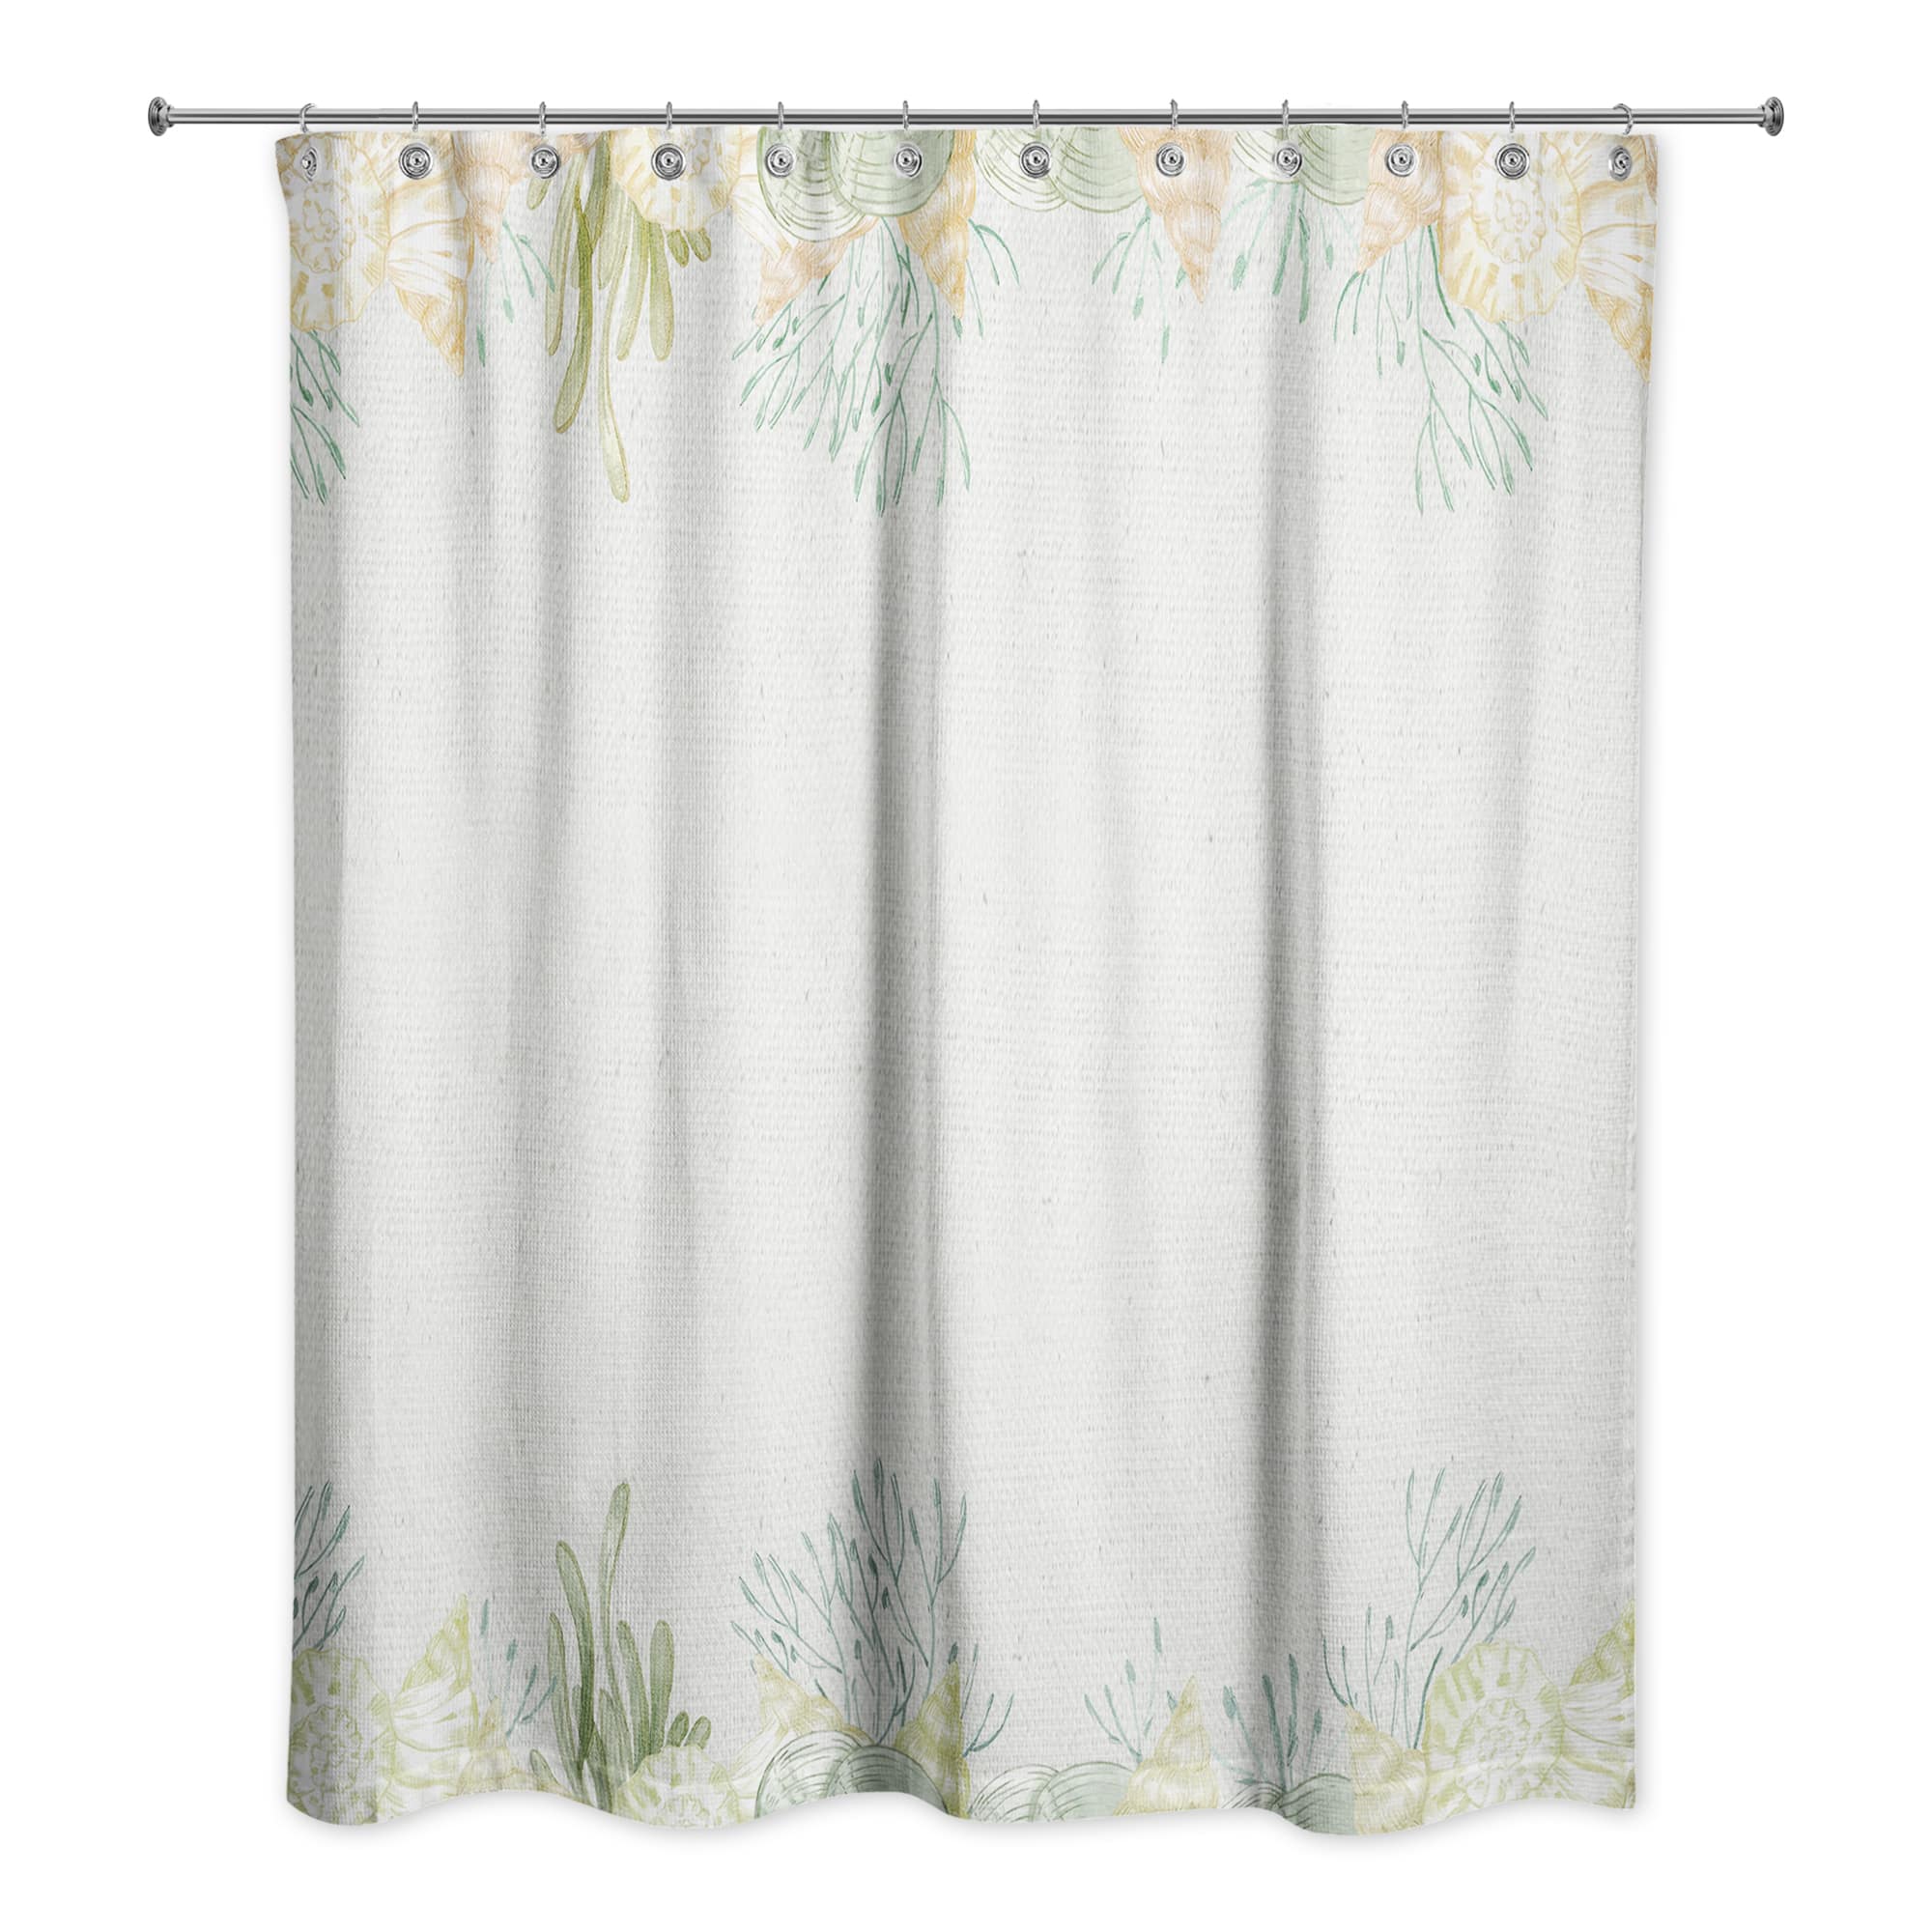 Holiday Sea Plants Patterned Fabric Shower Curtain